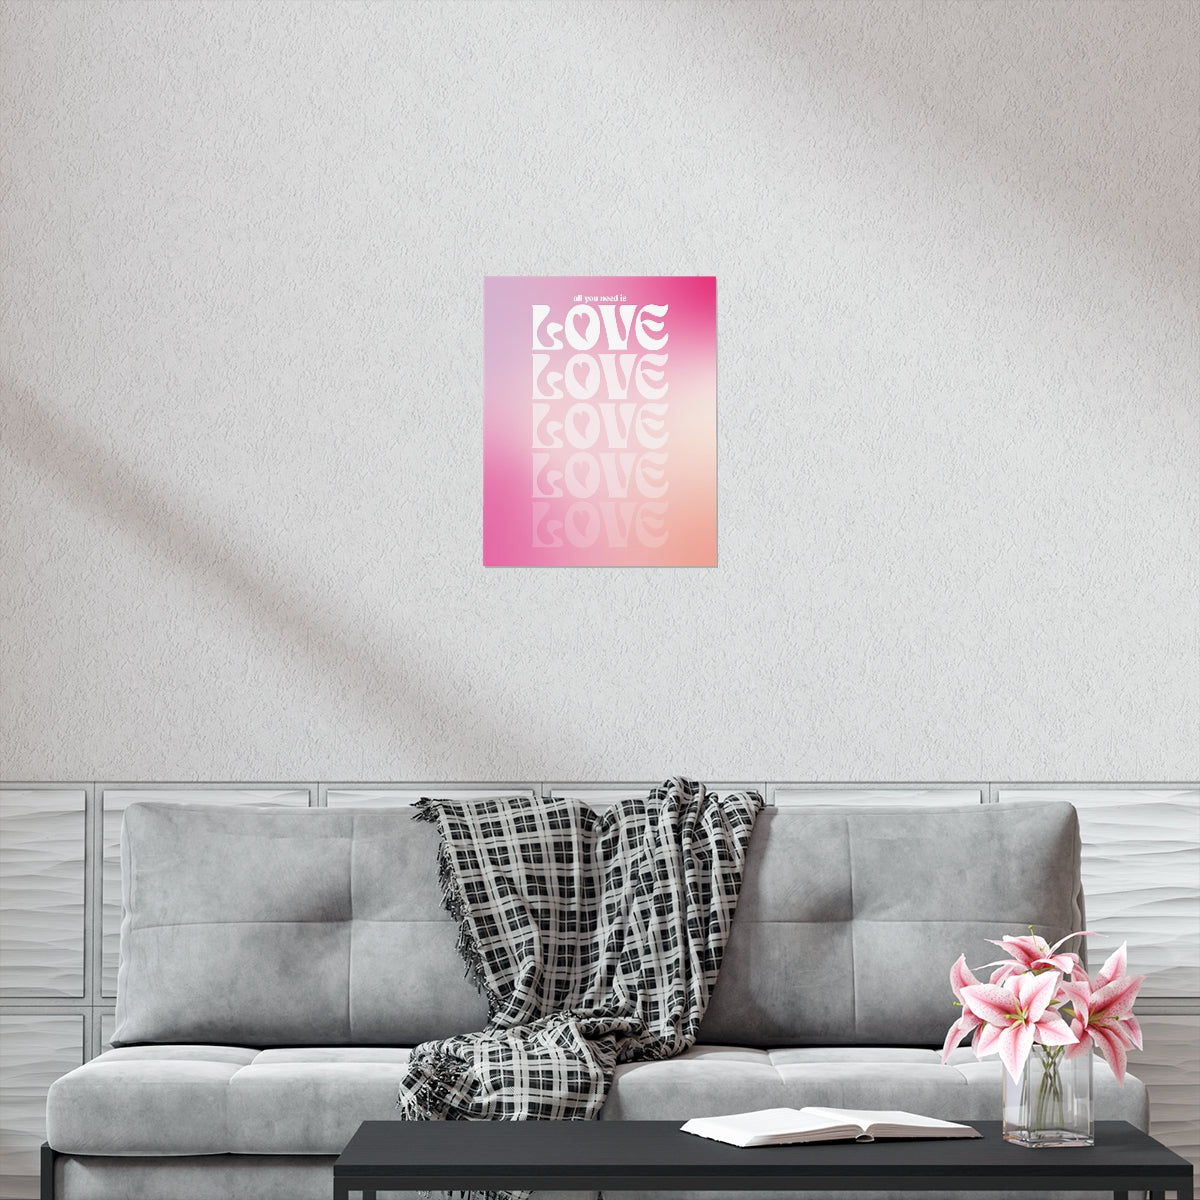 All You Need Is Love Wall Art Print